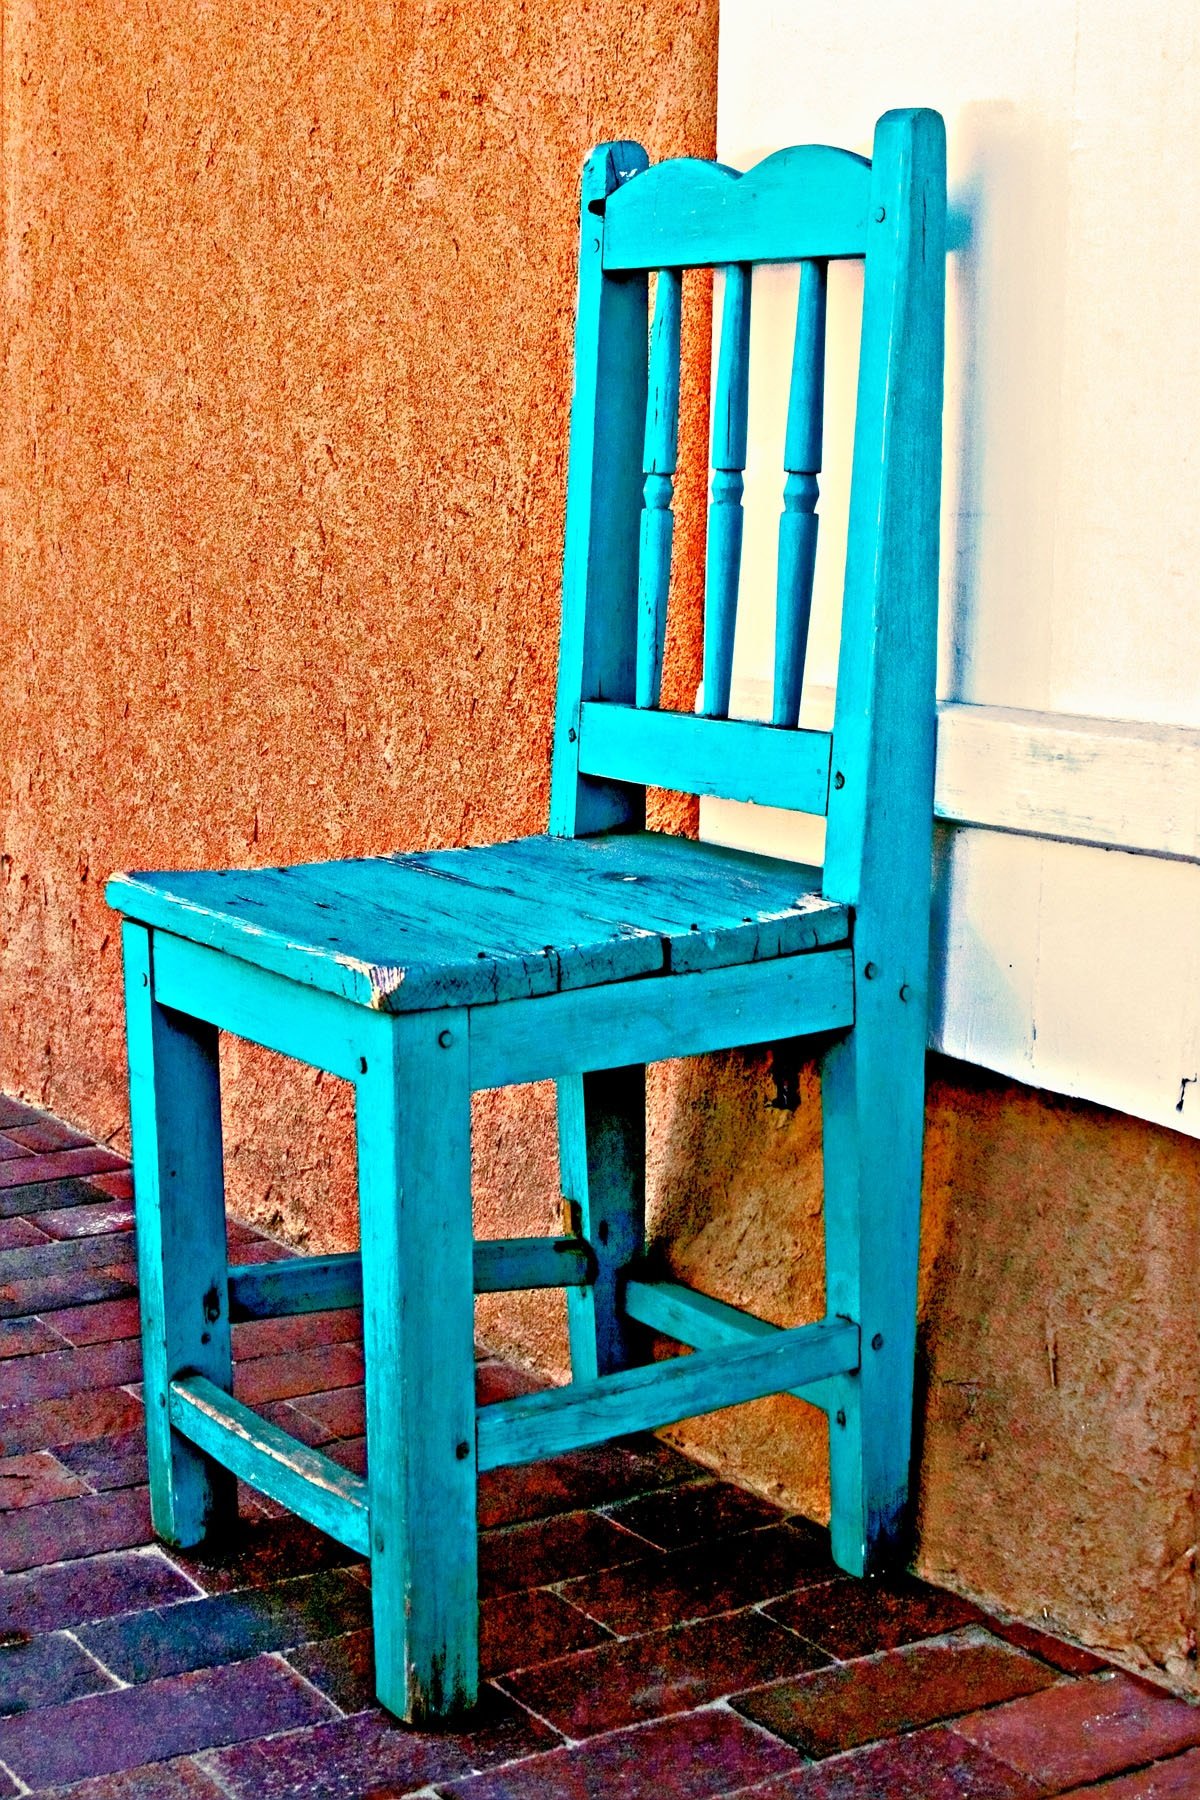 THE CHAIR - I walked right past this chair on the sidewalk in this little western town. Fortunately for me, my wife said "Why  don’t  you take  a picture of that chair?". I love my wife!